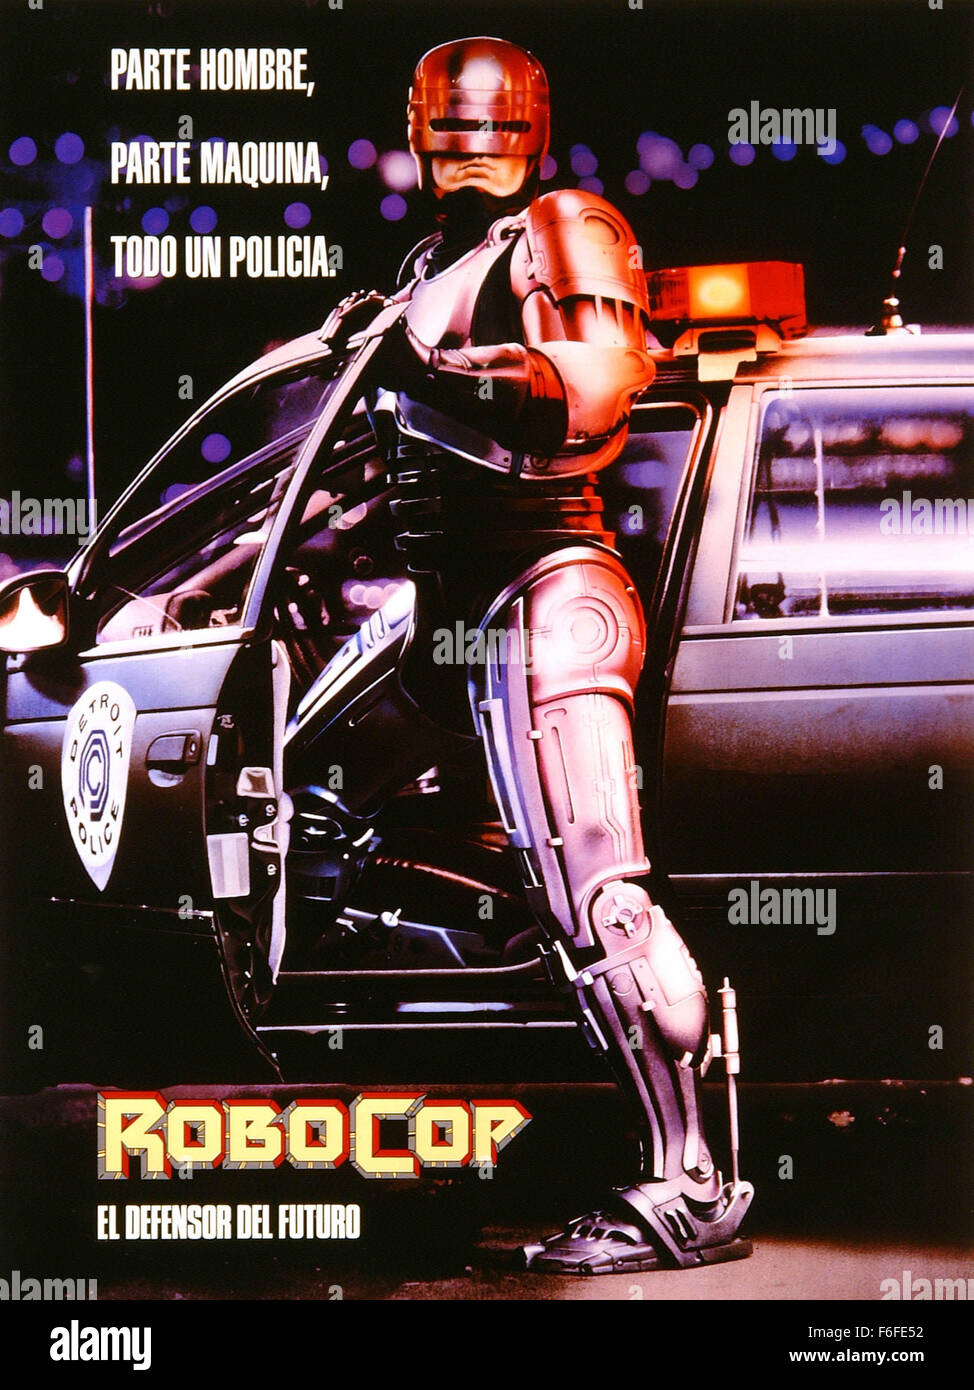 Jul 17, 1987; Dallas, TX, USA; Pictured:  A illustration from 'RoboCop,' a 1987 film directed by PAUL VERHOEVEN and starring PETER WELLER as RoboCop and NANCY ALLEN as Officer Anne Lewis. Stock Photo